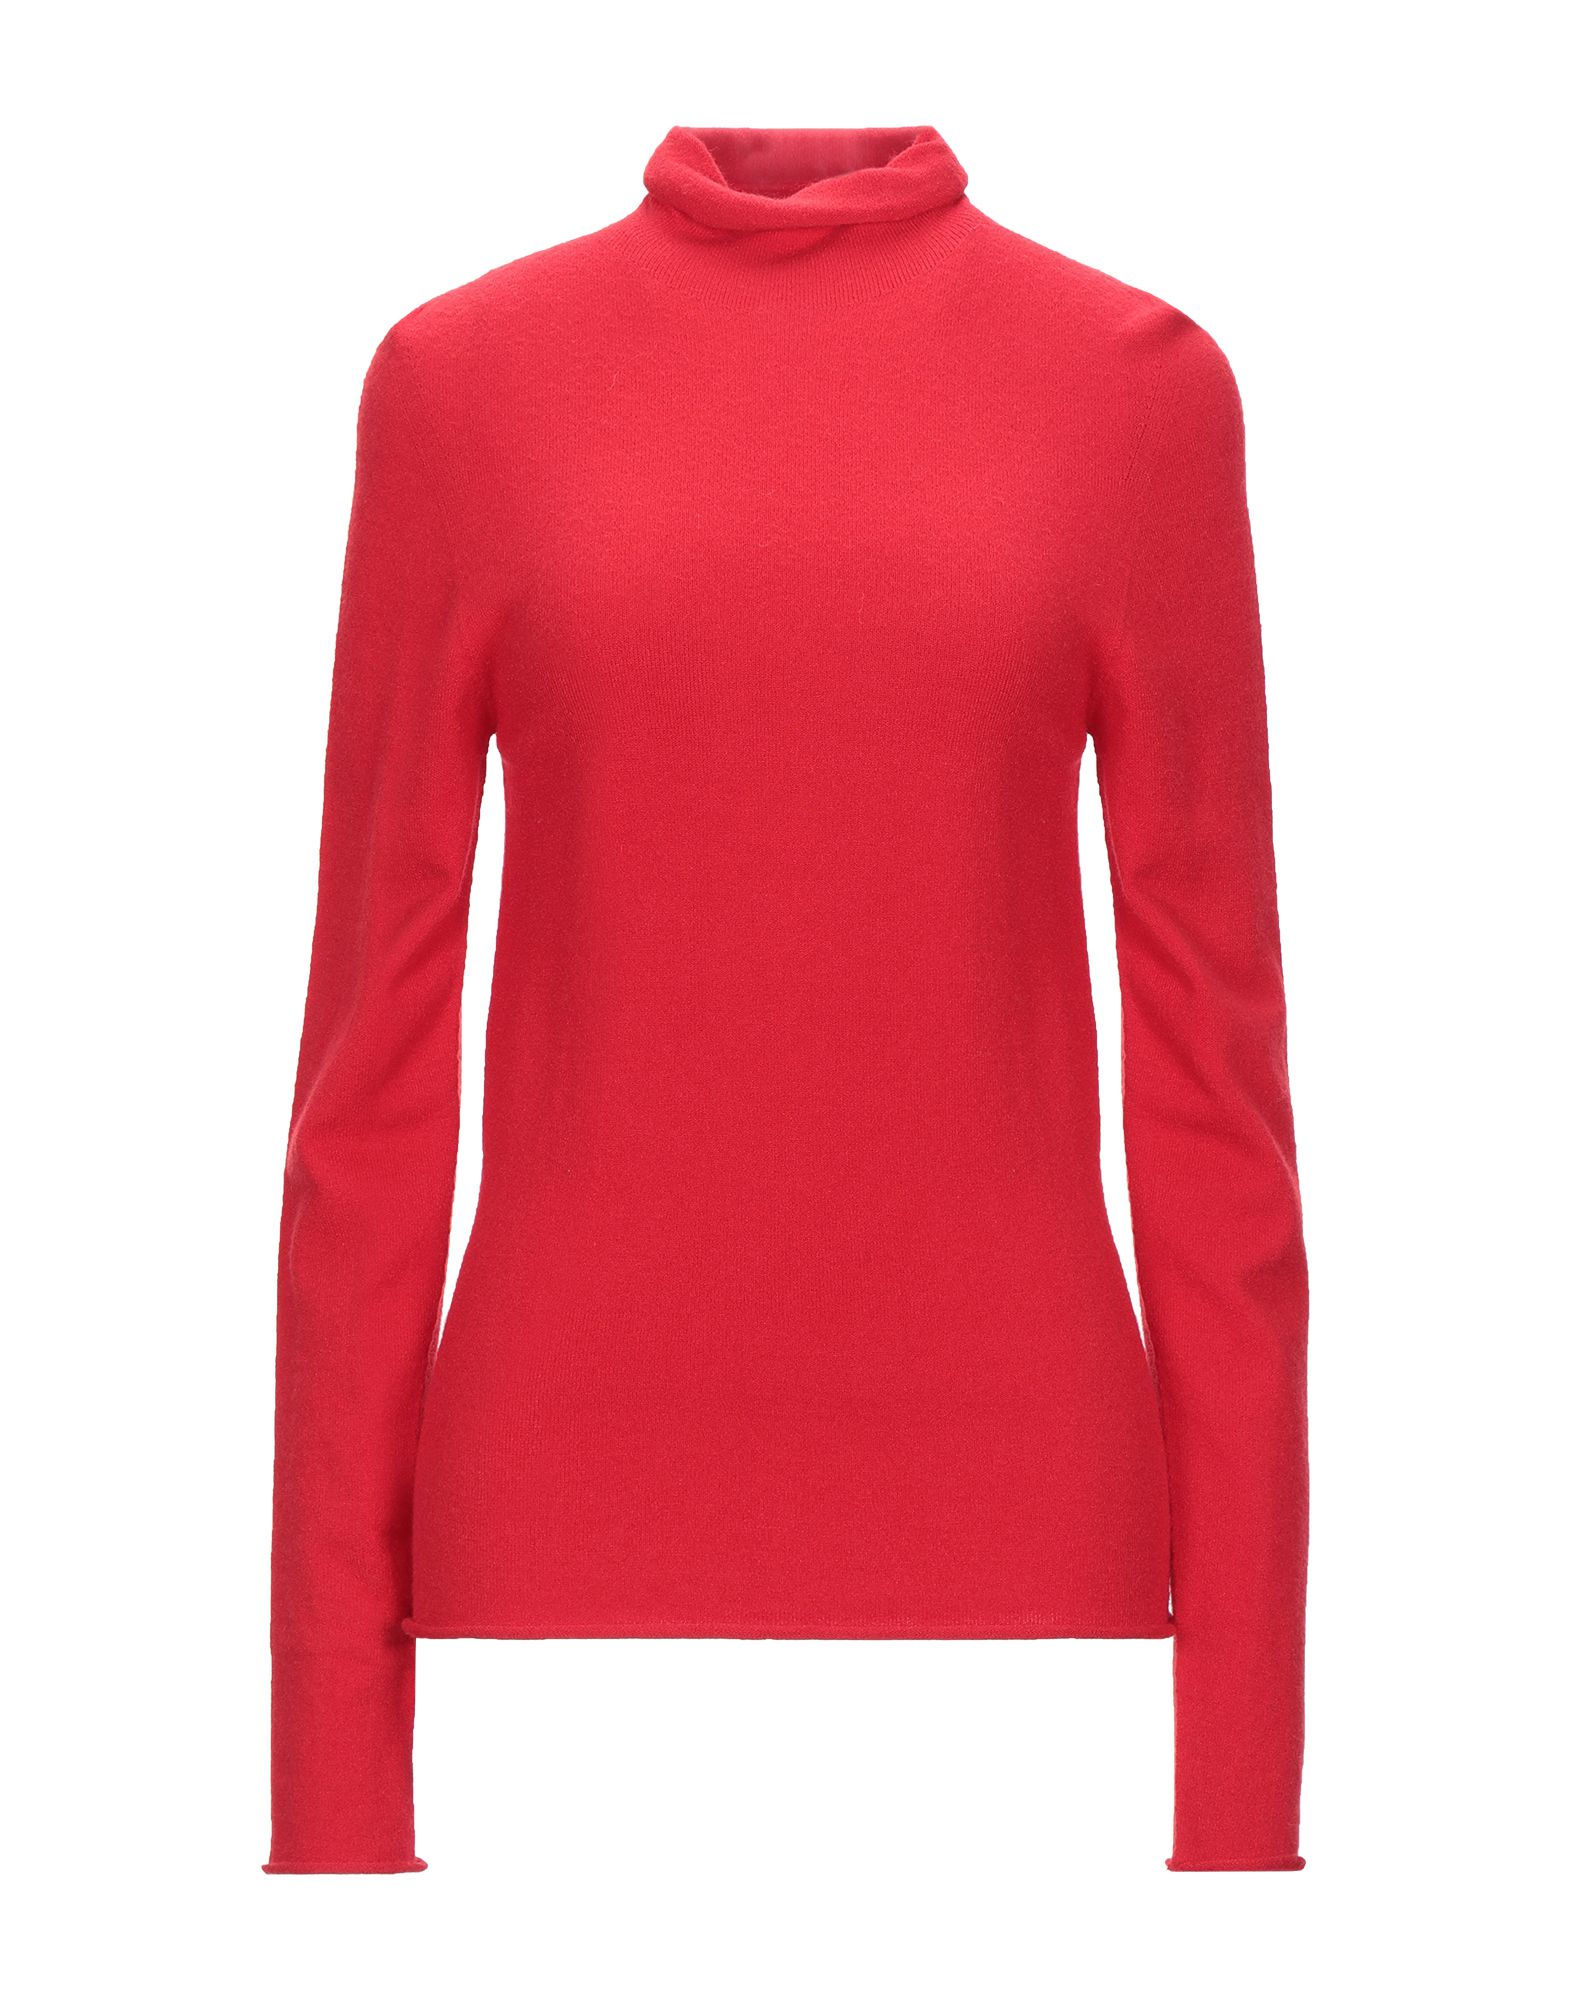 Anonyme Designers Turtlenecks In Red